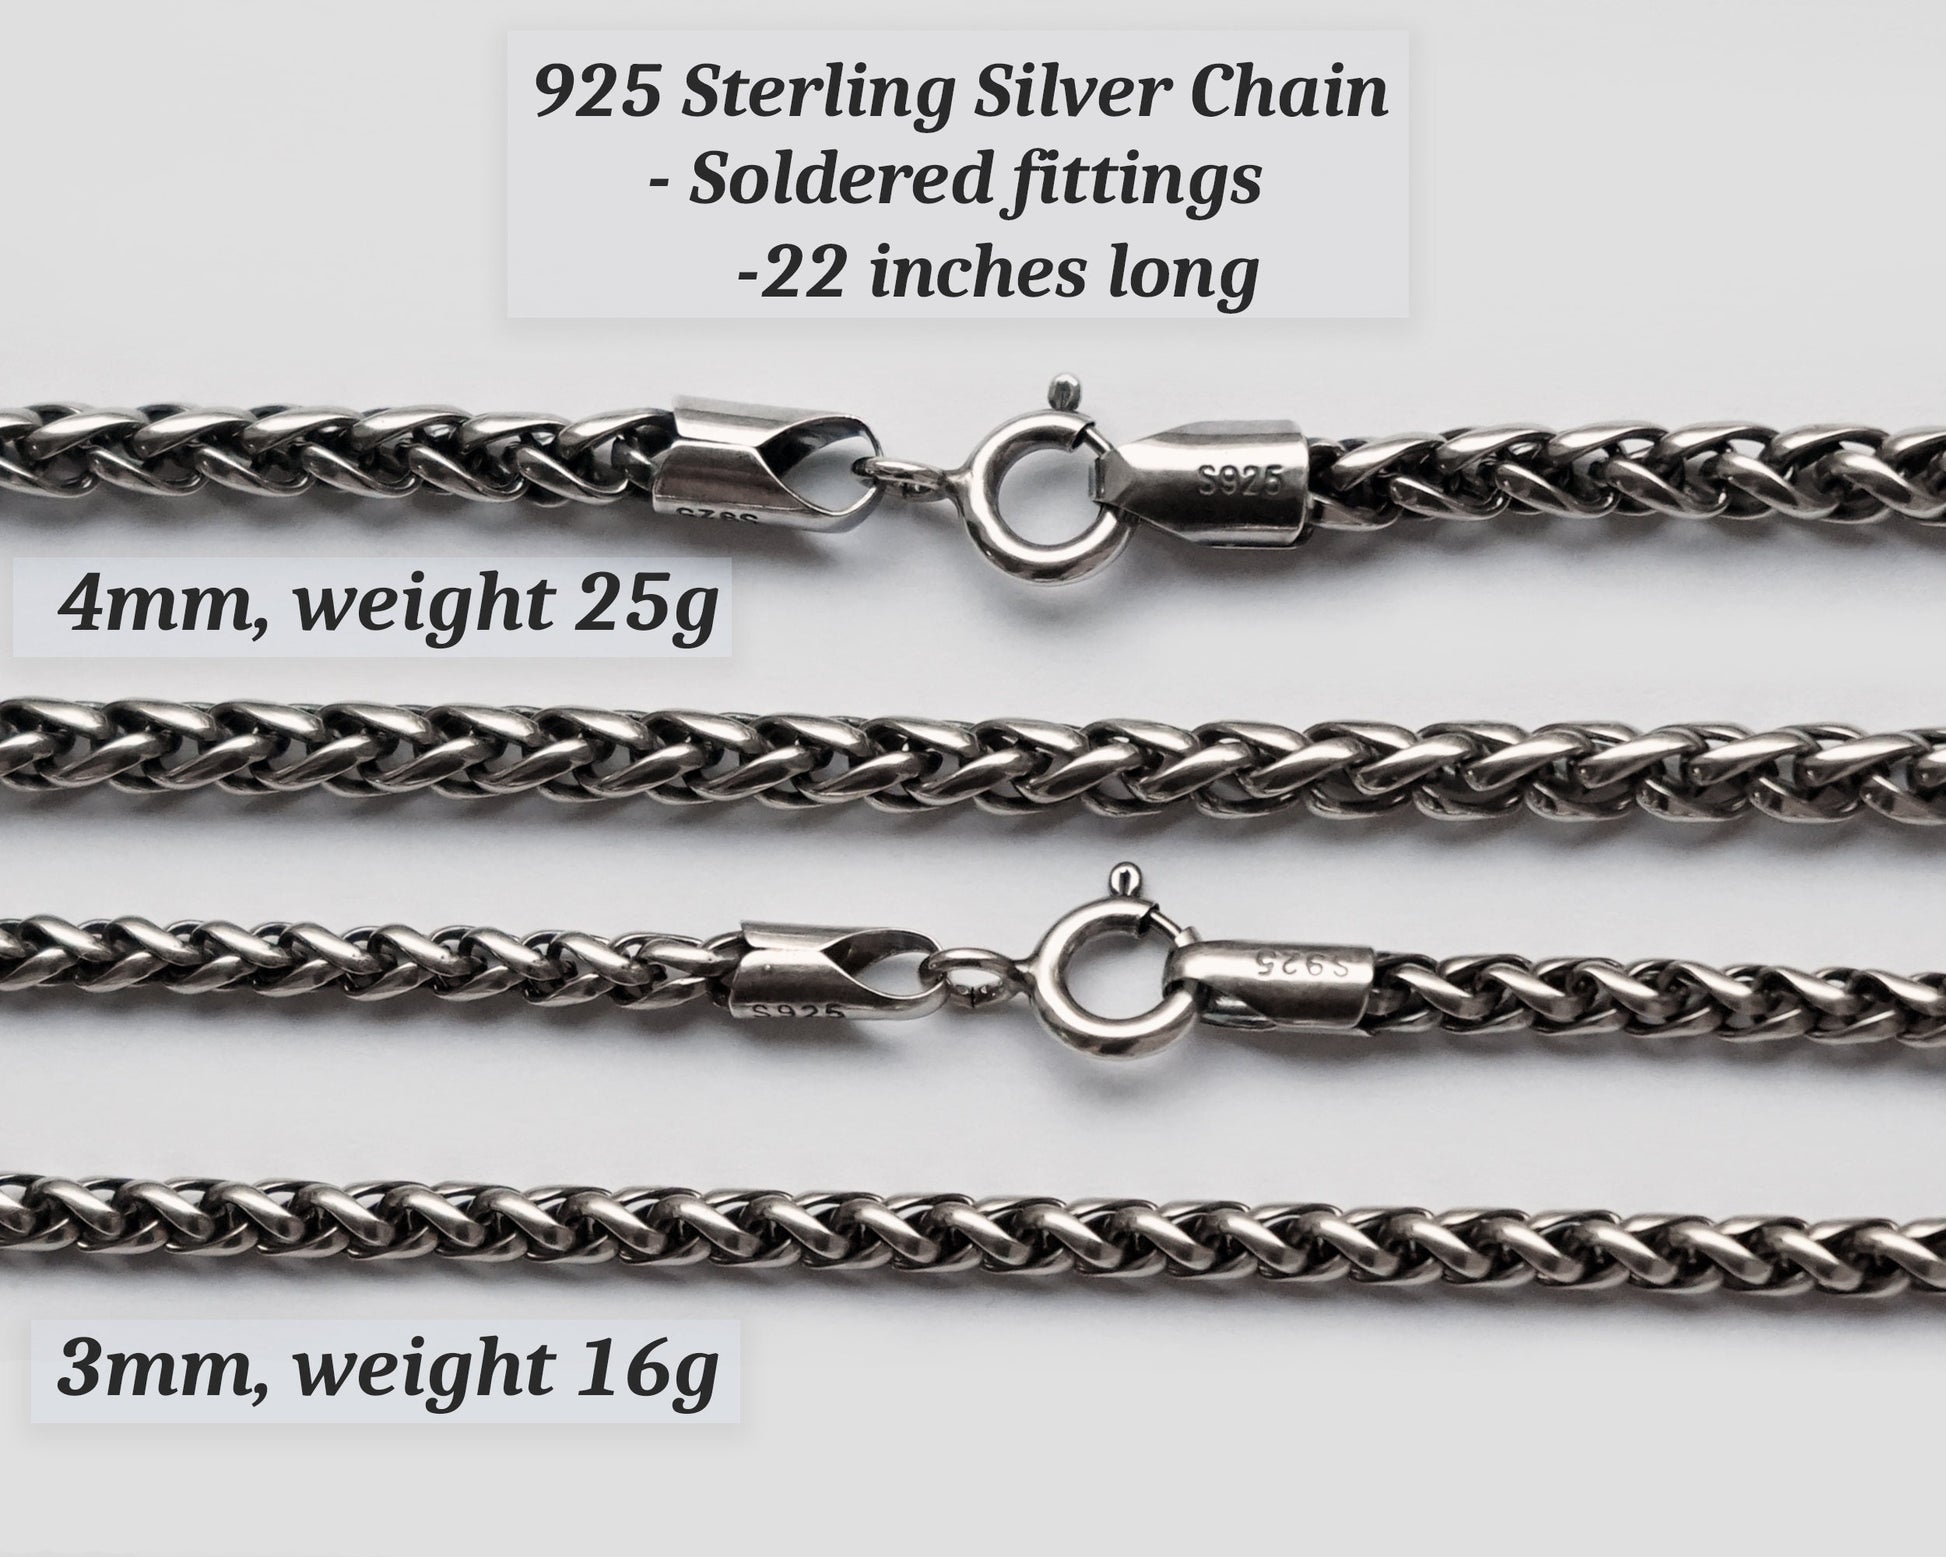 925 Sterling Silver Wheat Chain with soldered fittings 22 inches - Baldur Jewelry